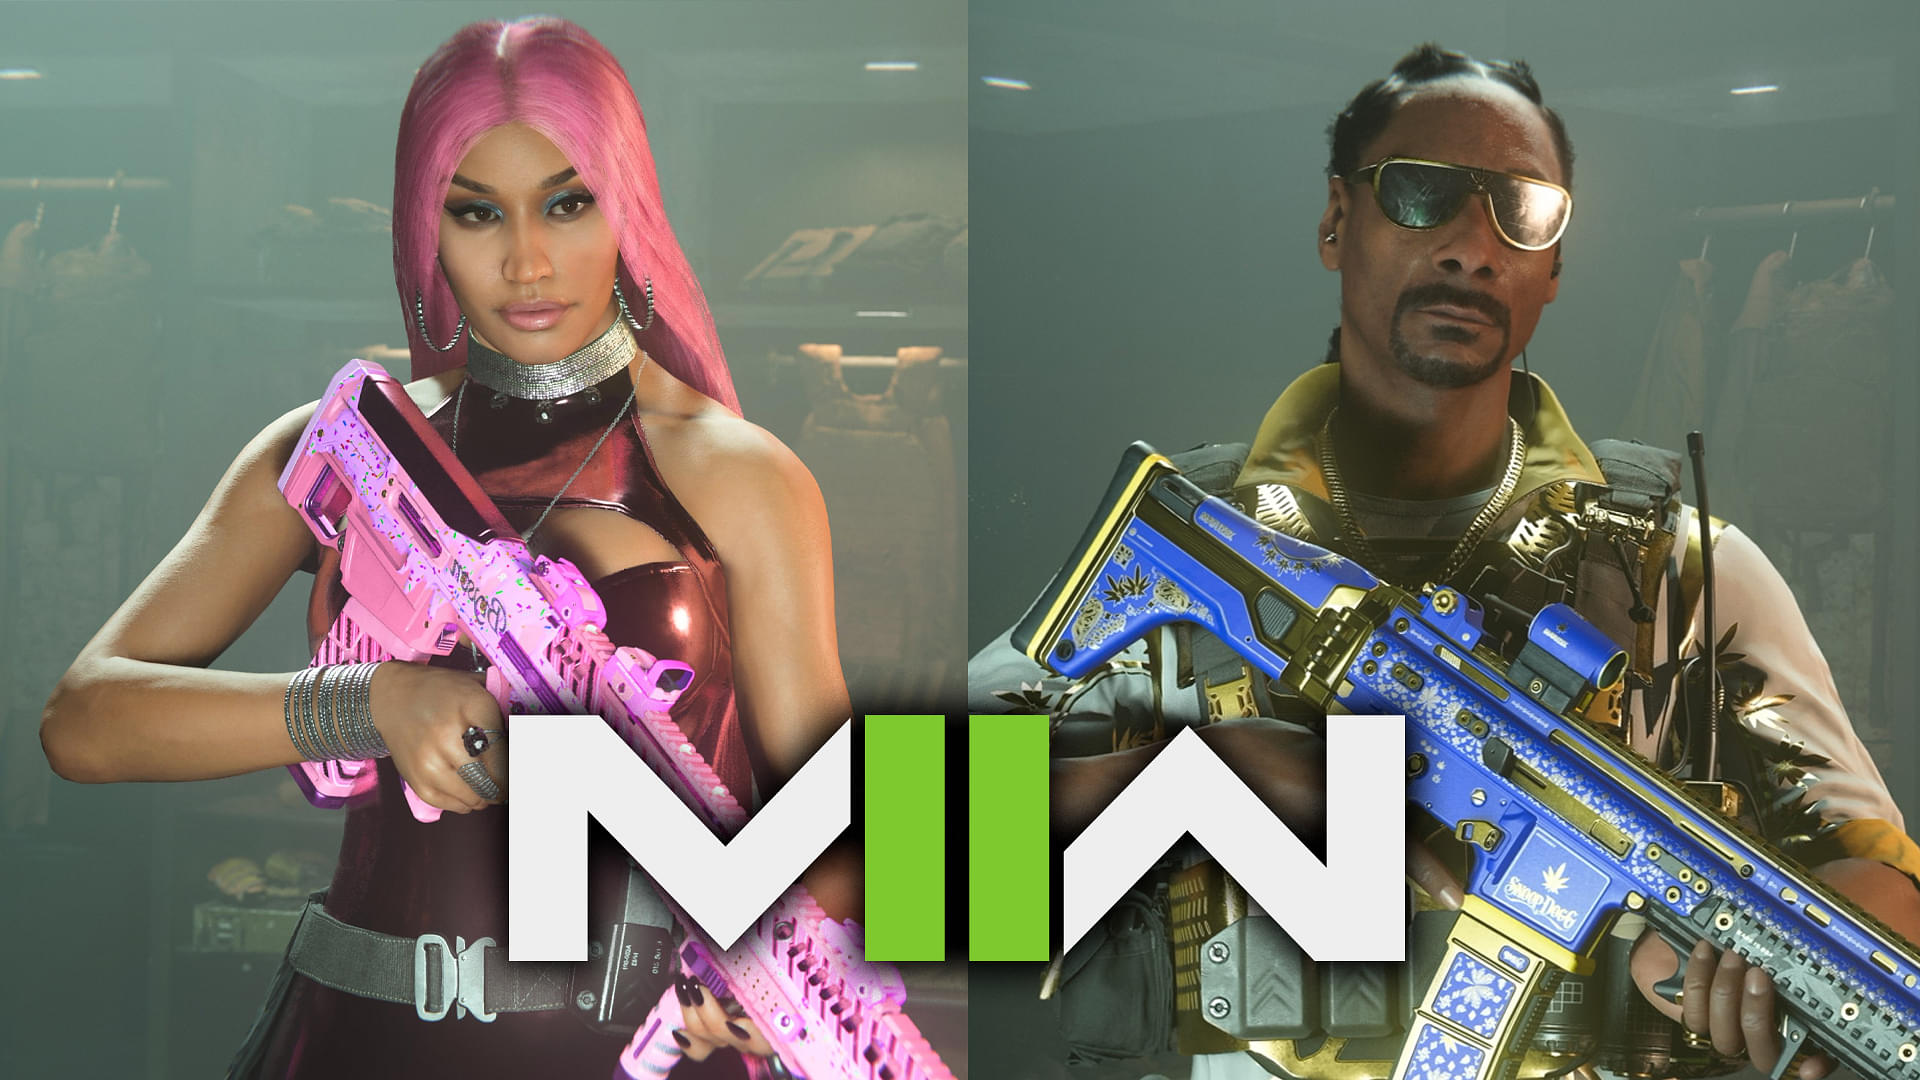 An image showing Nicki Minaj and Snoop Dogg with Call of Duty Modern Warfare 2 logo in front